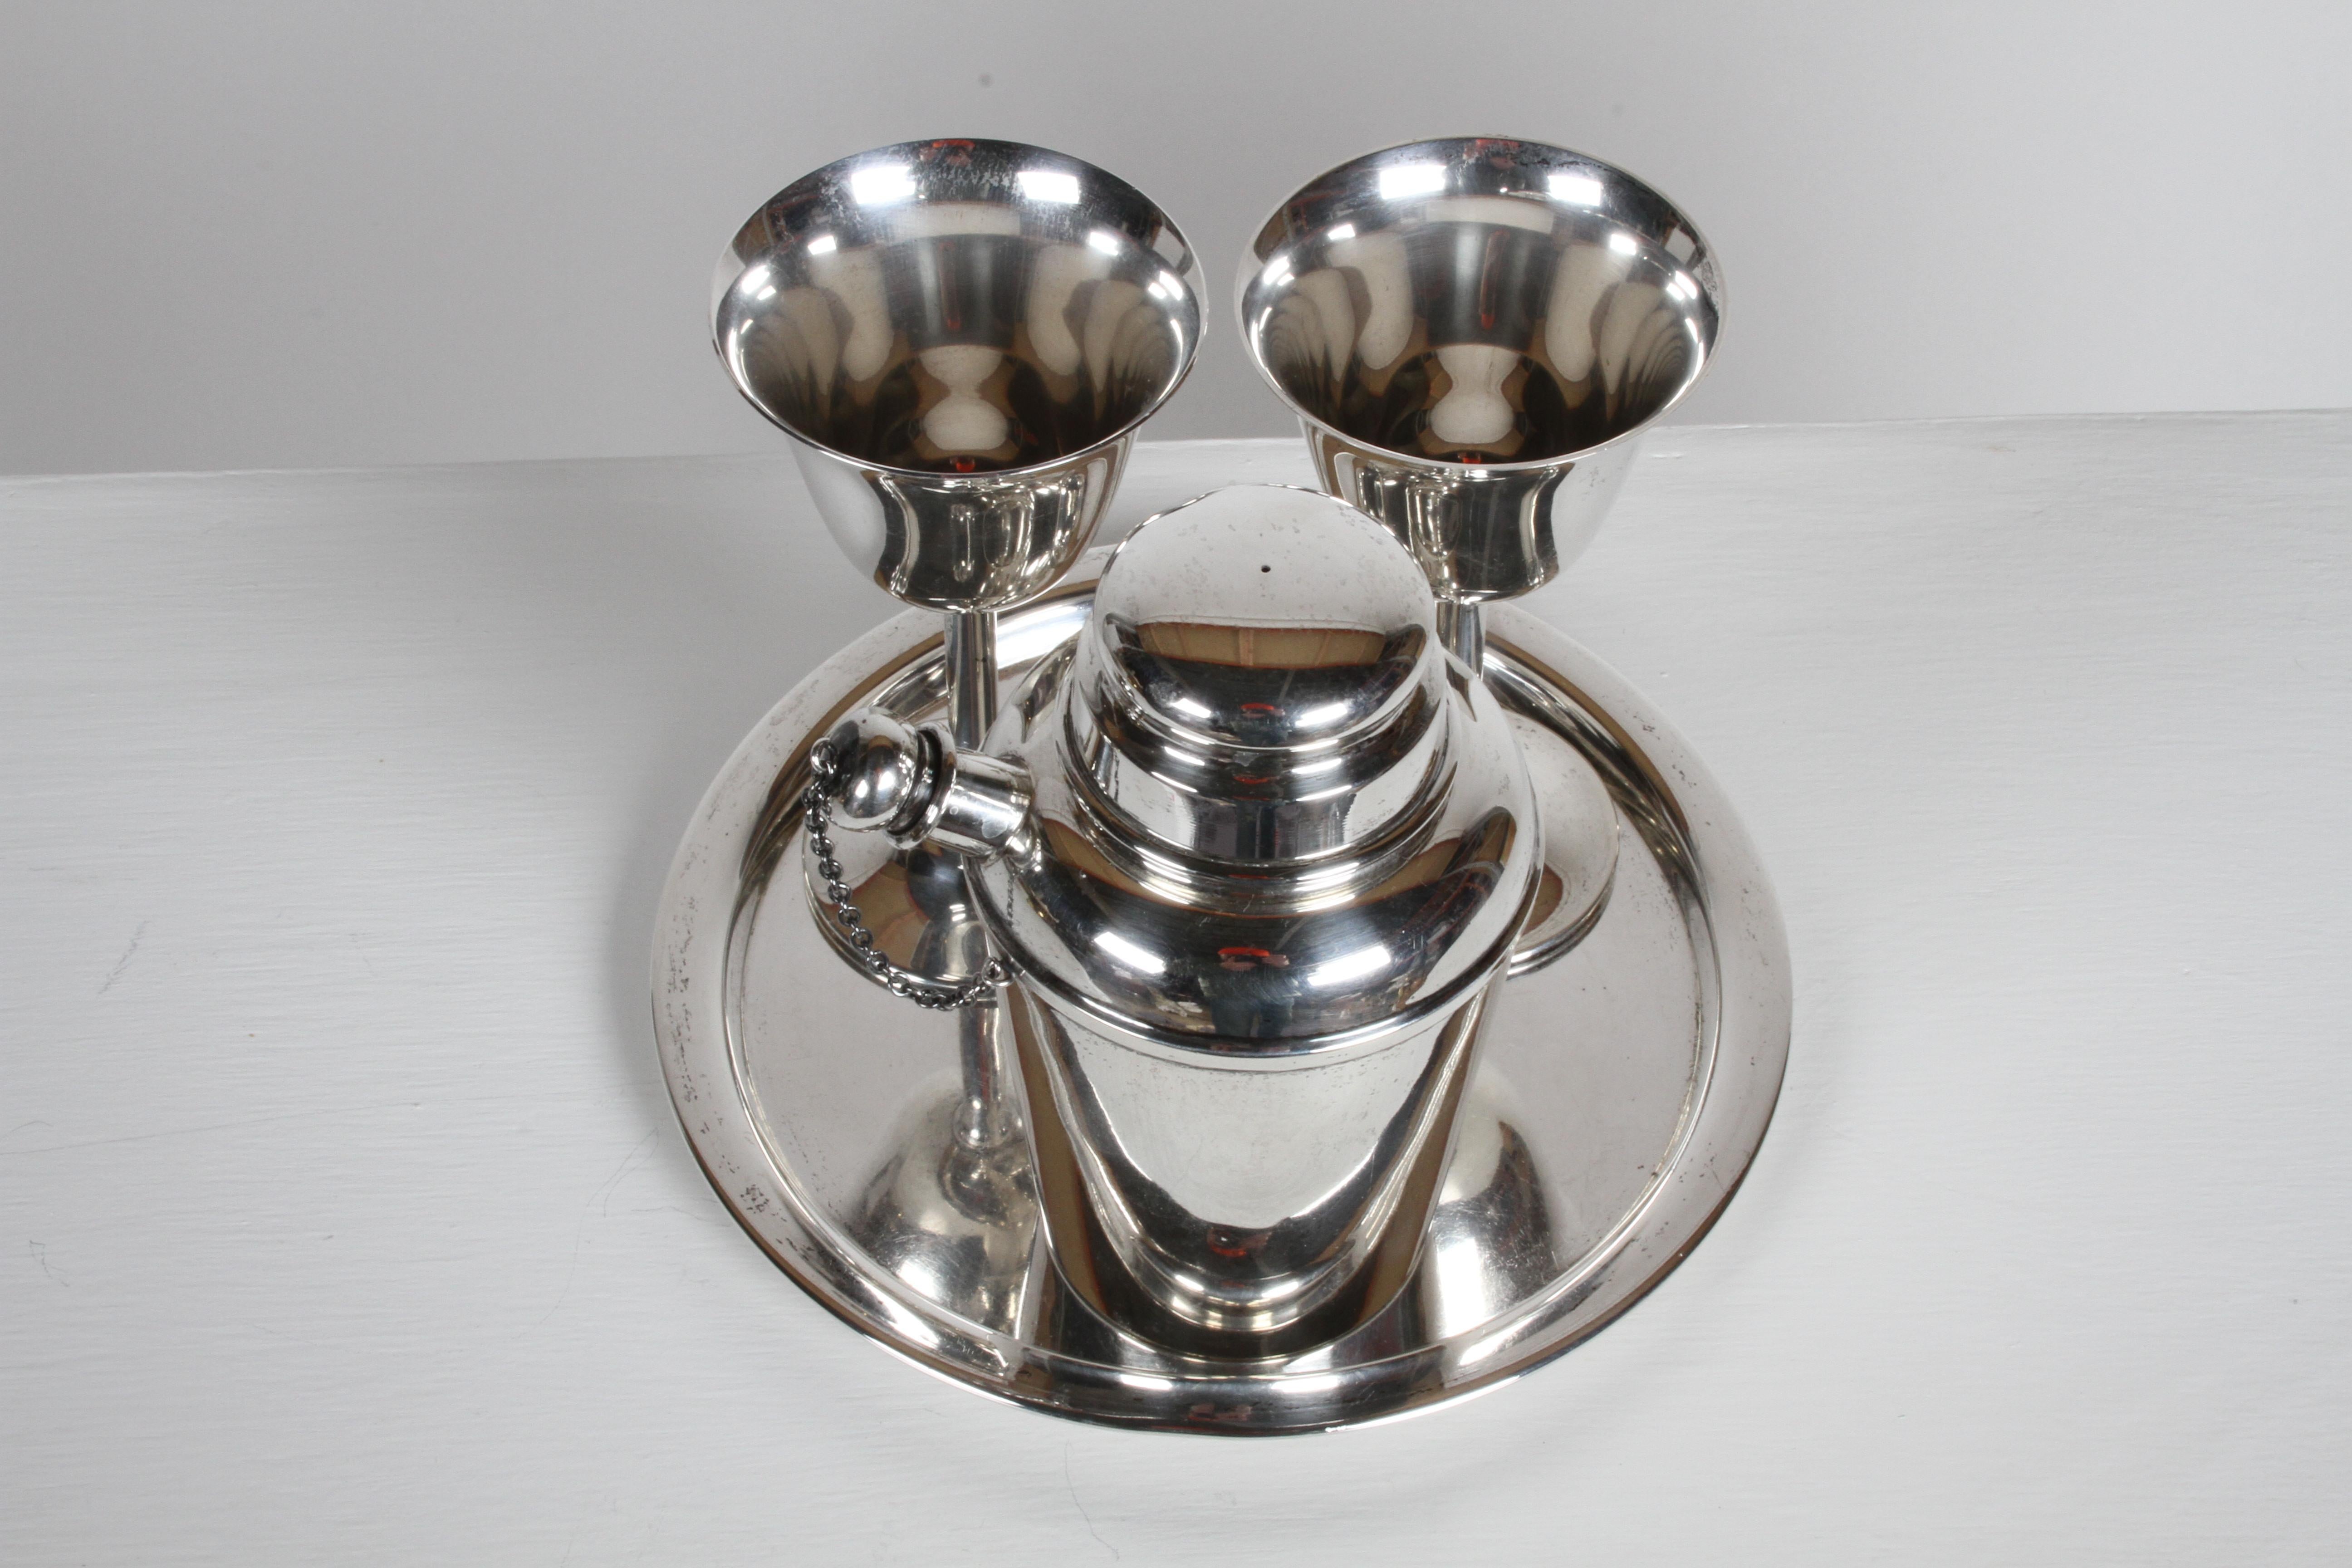 In the Art Deco style, this Reed & Barton sterling x110 cocktail shaker and tray were produced in the 1950s, the sterling goblets were made by Fisher. Shaker is a tapered cylinder design with removable lift-up dome lid, pronounced spout with stopper